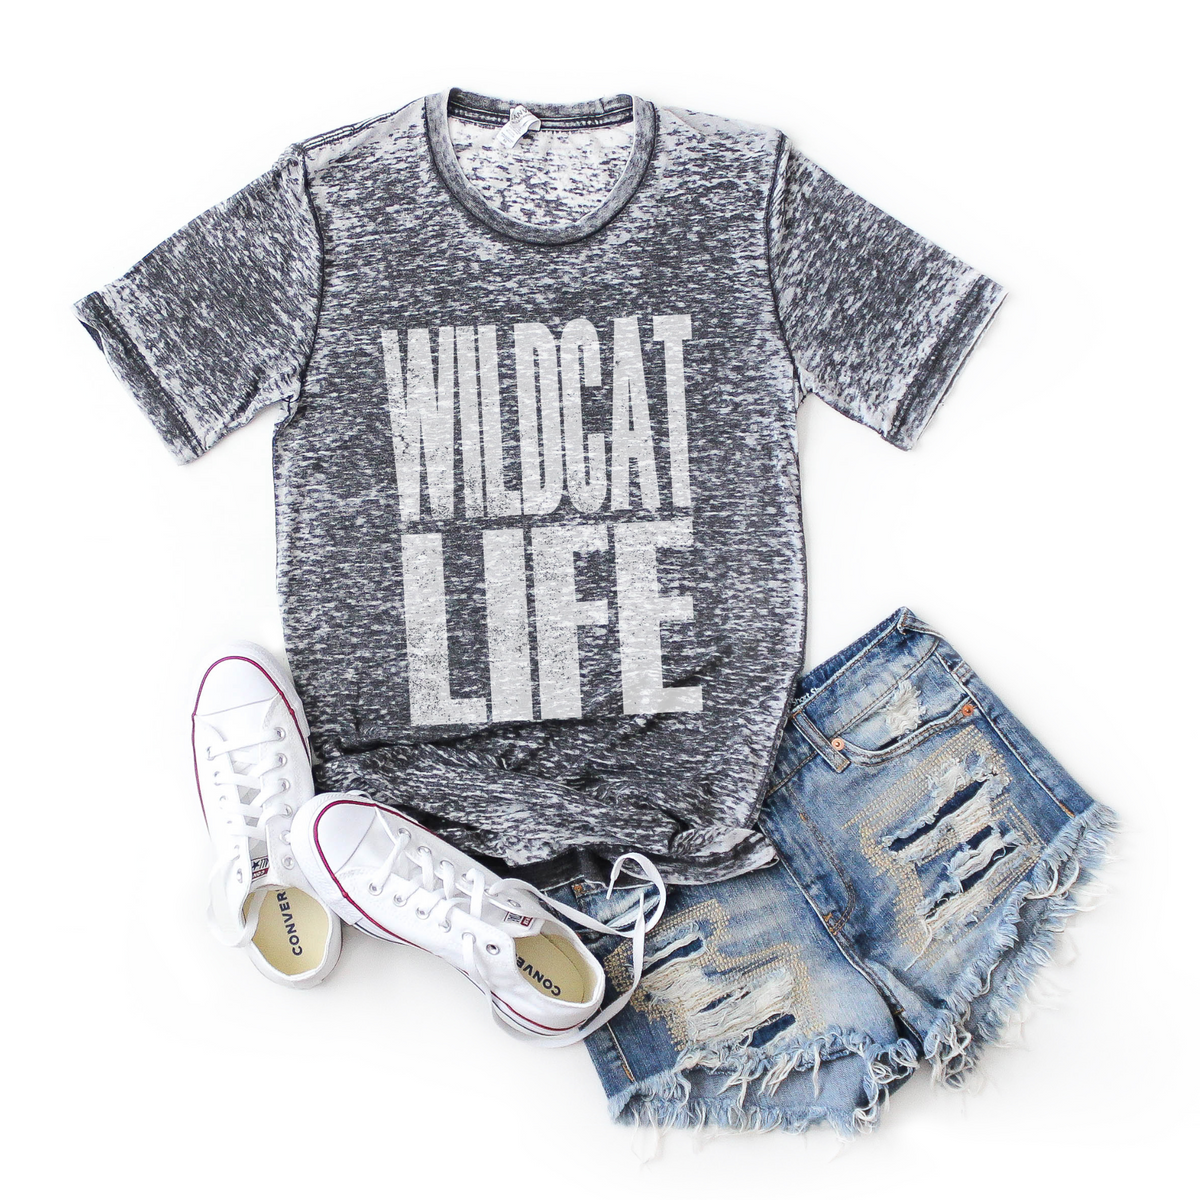 Wildcat Life Super Faded Distressed White Digital Design, PNG